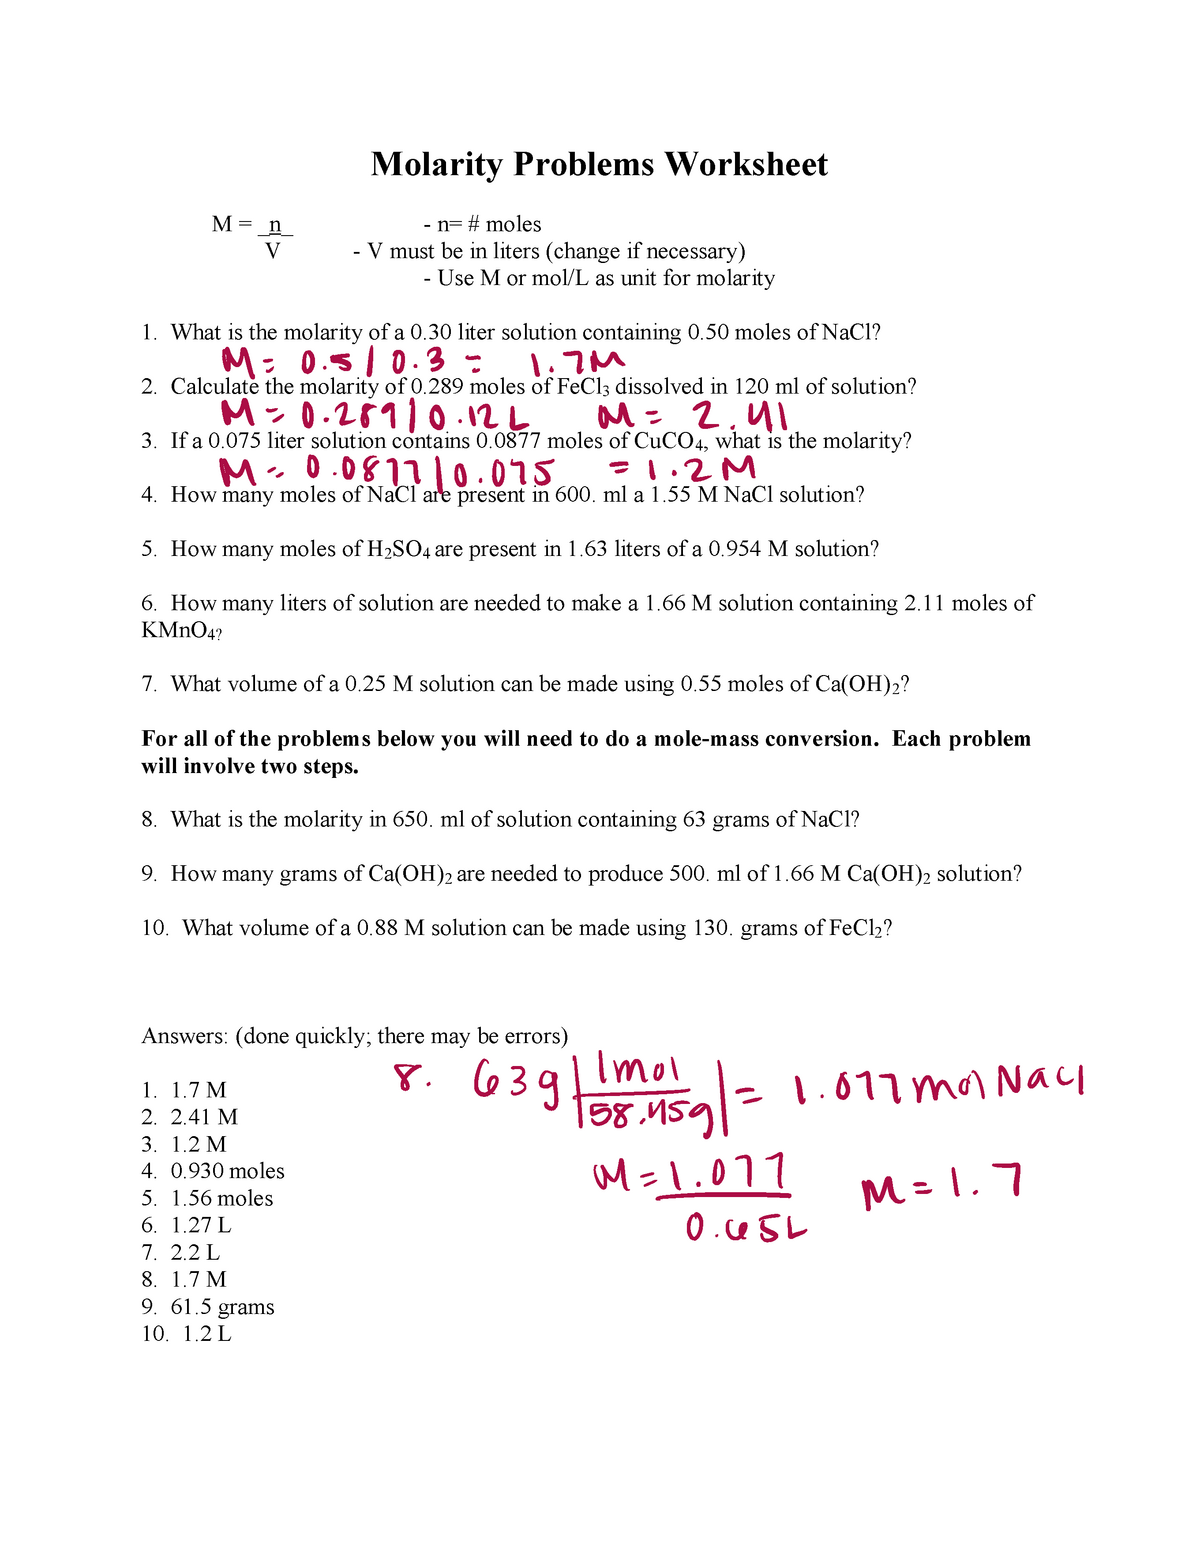 Molarity and dilution worksheets 21 - Molarity Problems Worksheet M Throughout Molarity Worksheet Answer Key